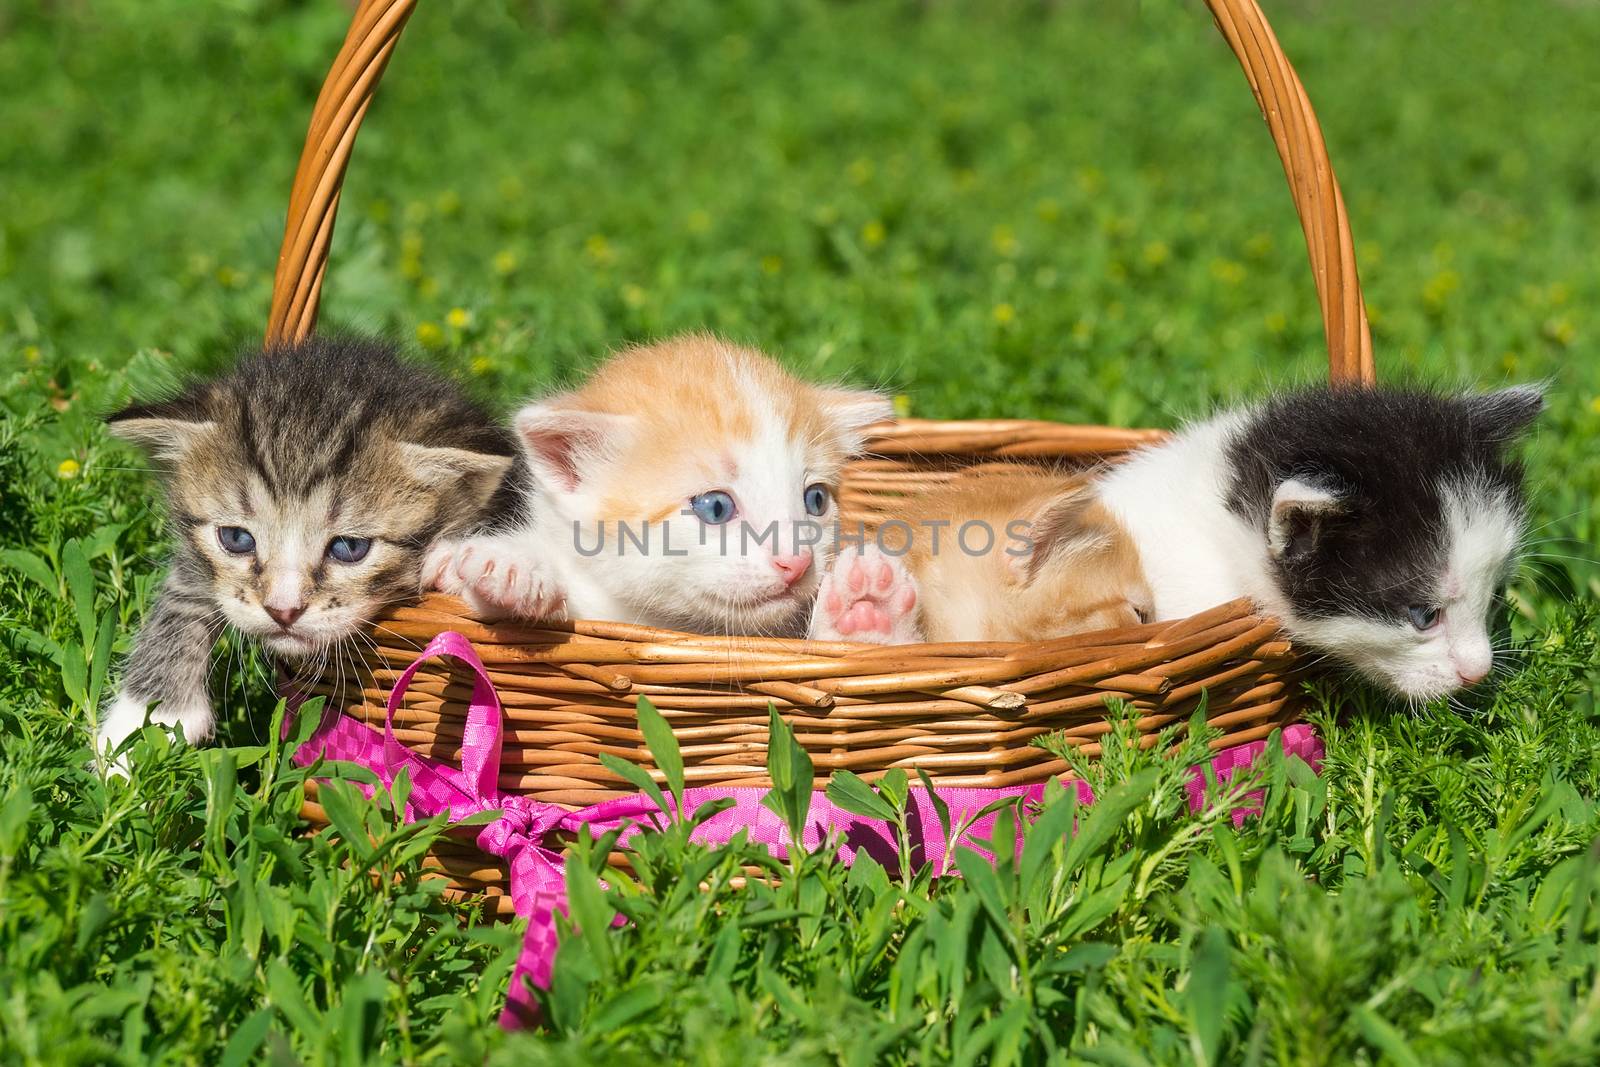 A small red kitten is sitting in a basket